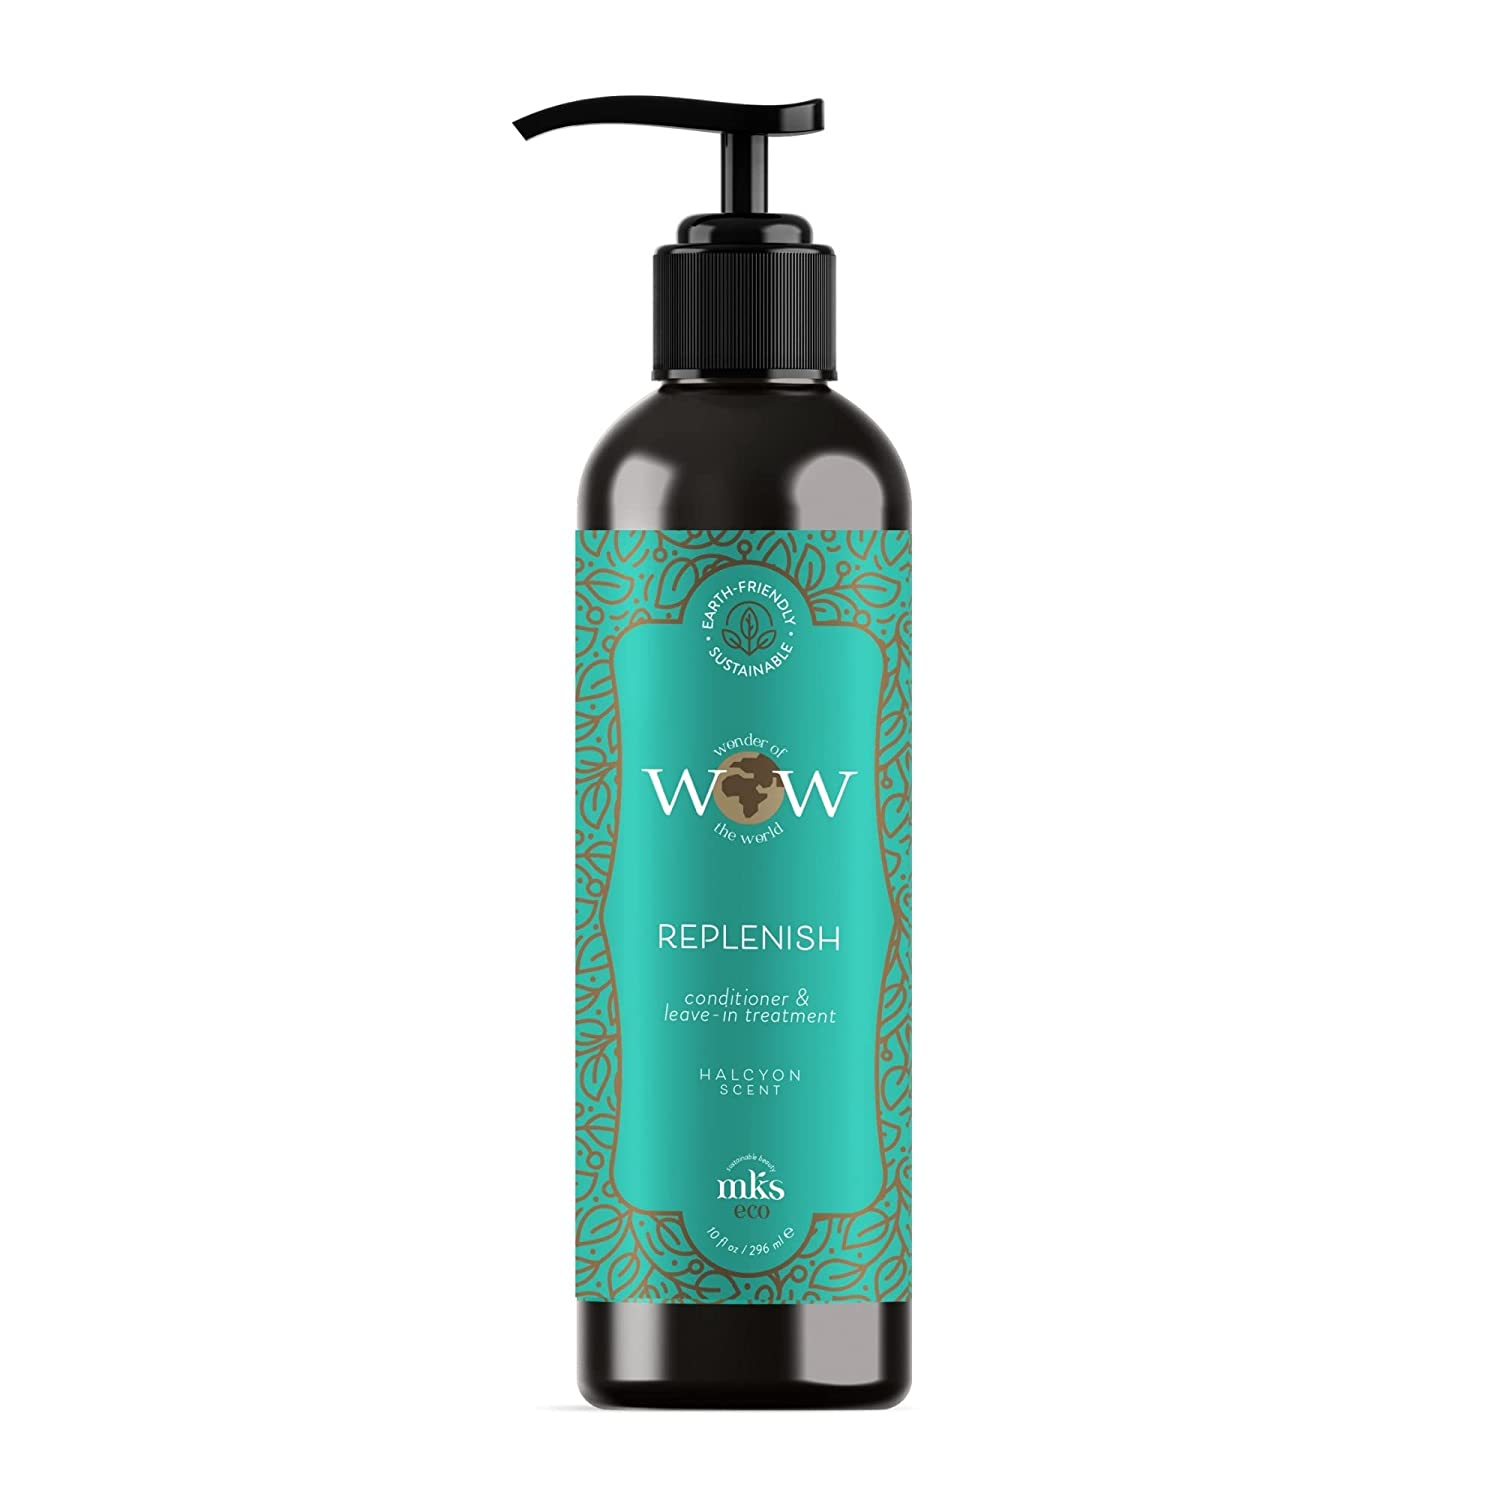 MKS eco WOW Replenish Conditioner & Leave-In Treatment - $20.00 - $32.00